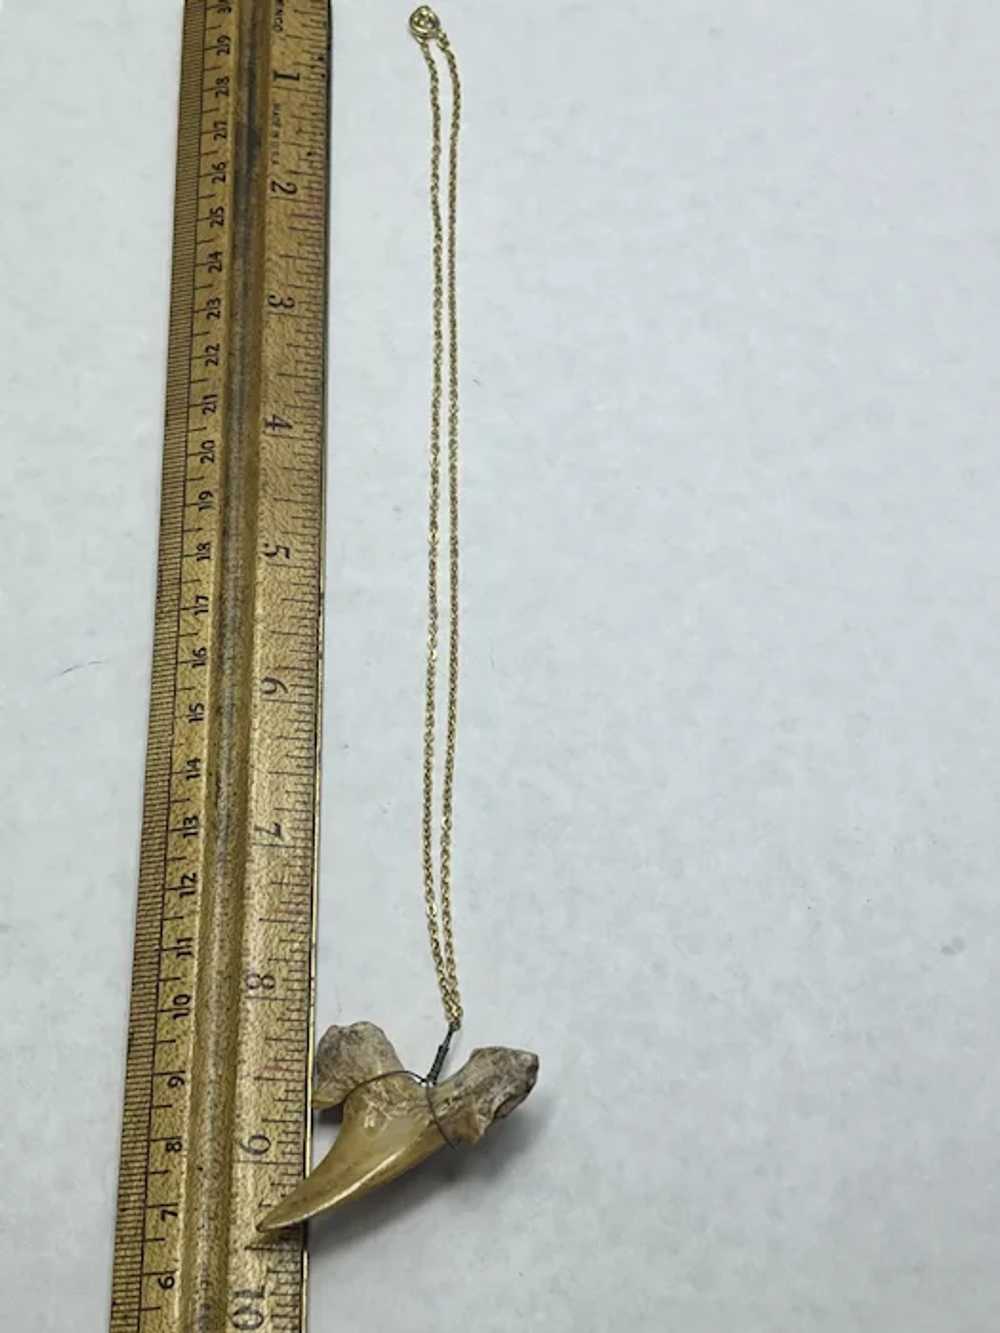 Vintage Shark Tooth Pendant Necklace - image 6